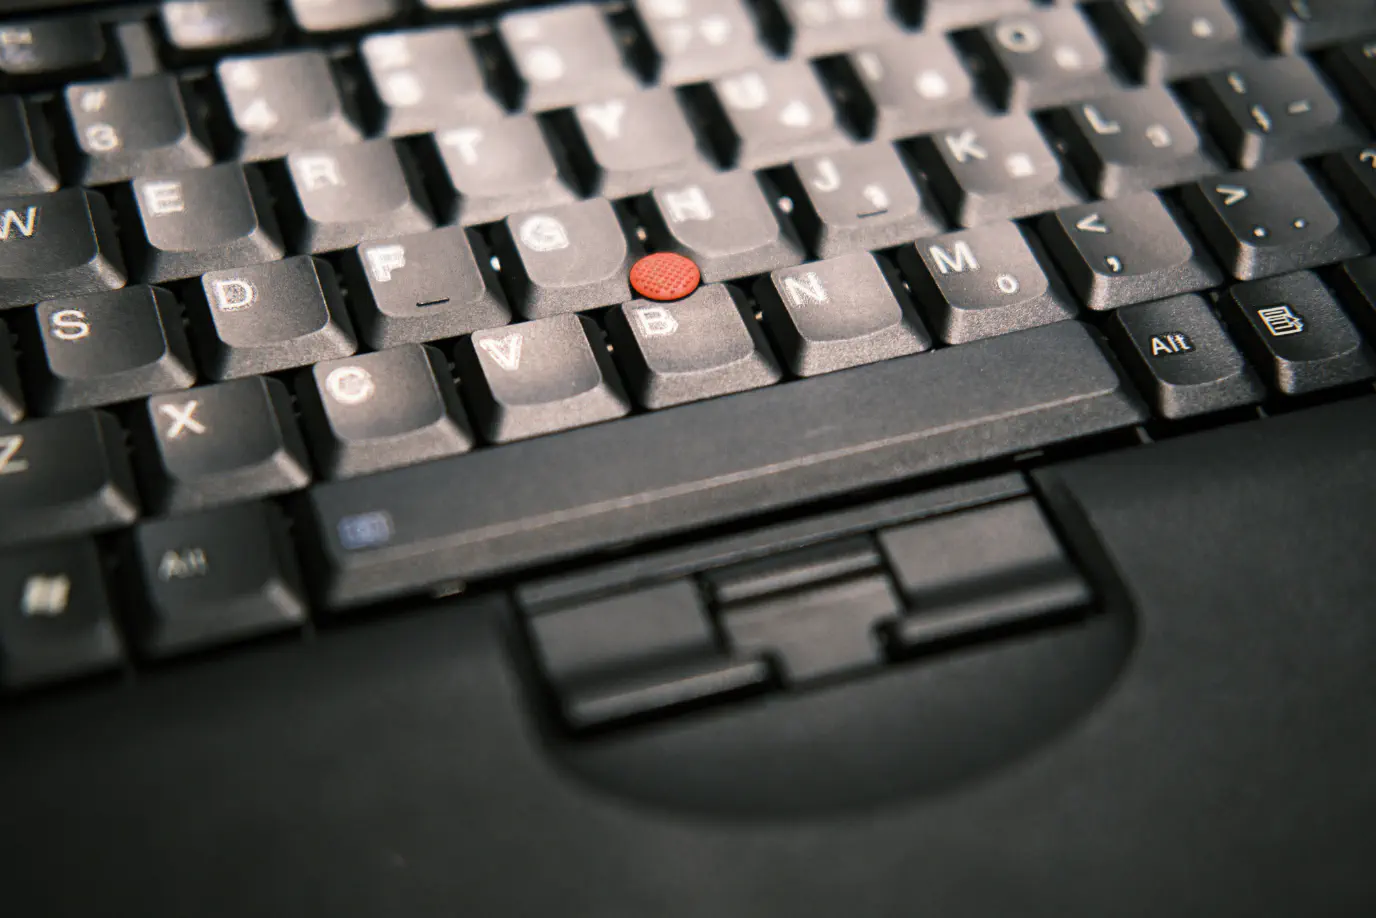 A ThinkPad X60T keyboard highlighting the TrackPoint